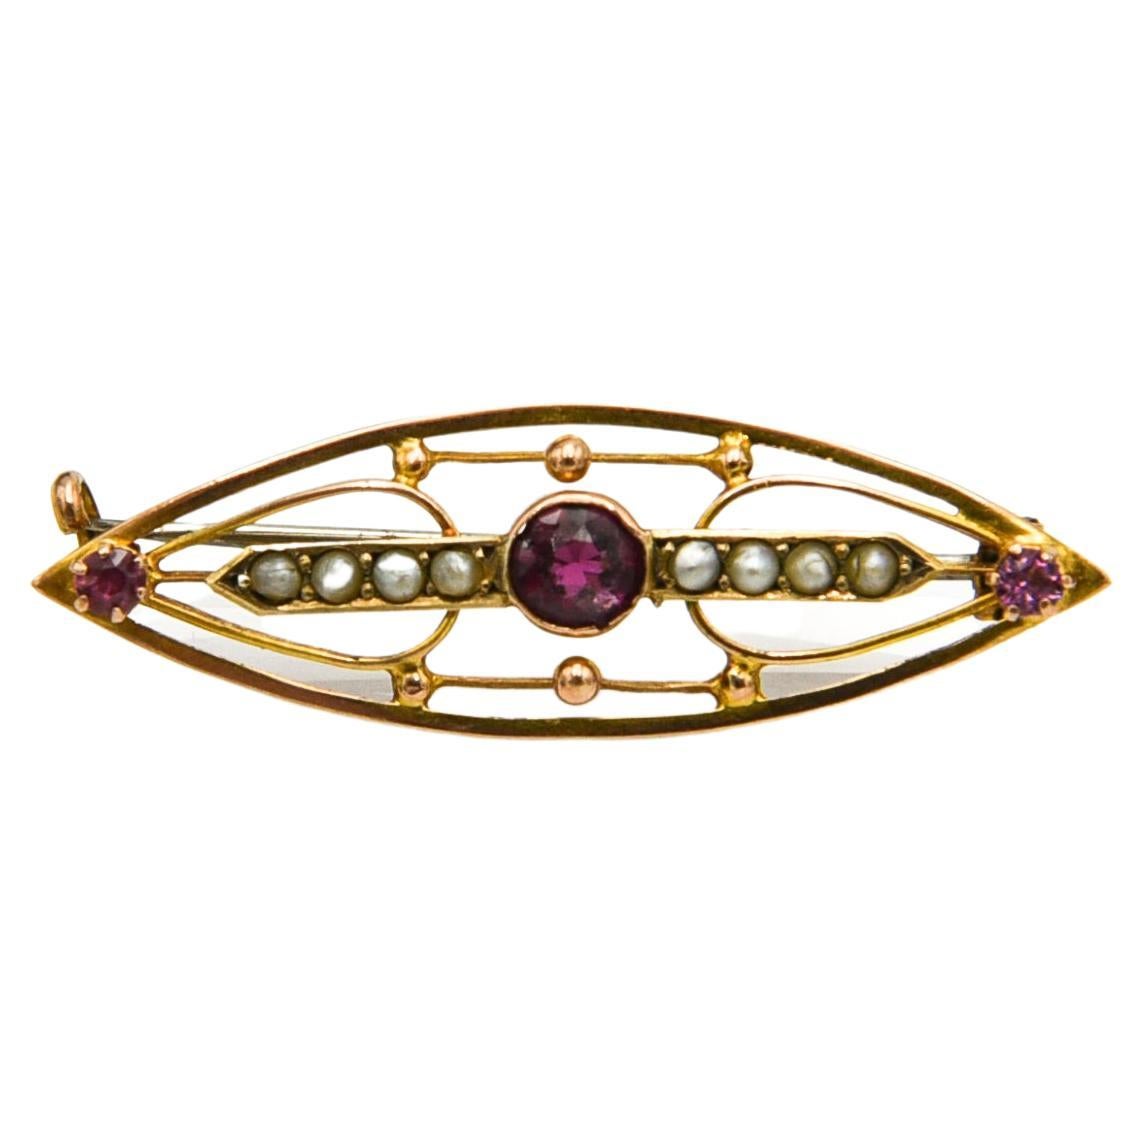 Old gold brooch with tourmalines and pearls